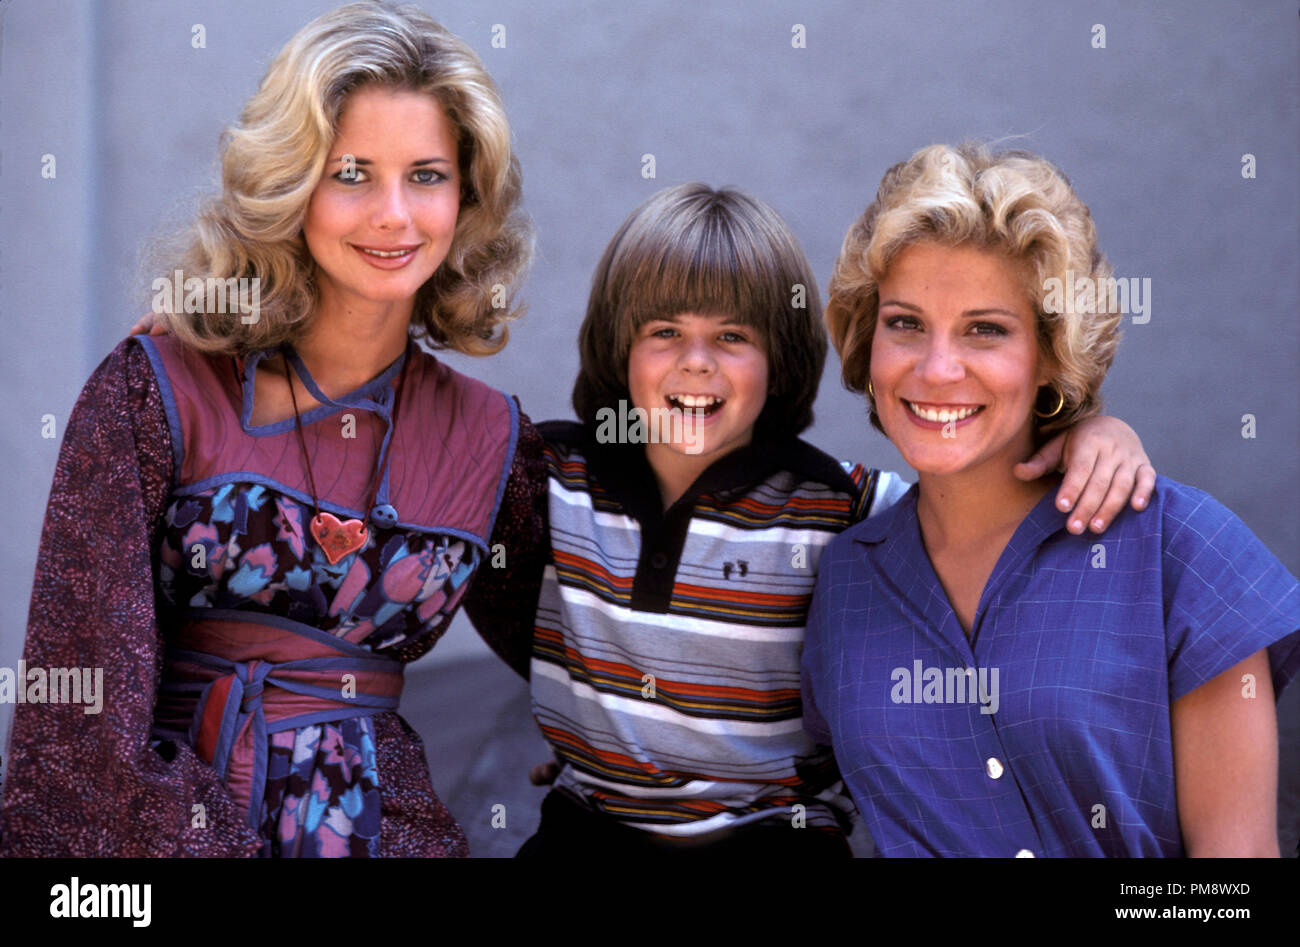 Studio Publicity Still from 'Eight Is Enough' Dianne Kay, Adam Rich, Lani O'Grady 1979 All Rights Reserved    File Reference # 31718128THA  For Editorial Use Only Stock Photo